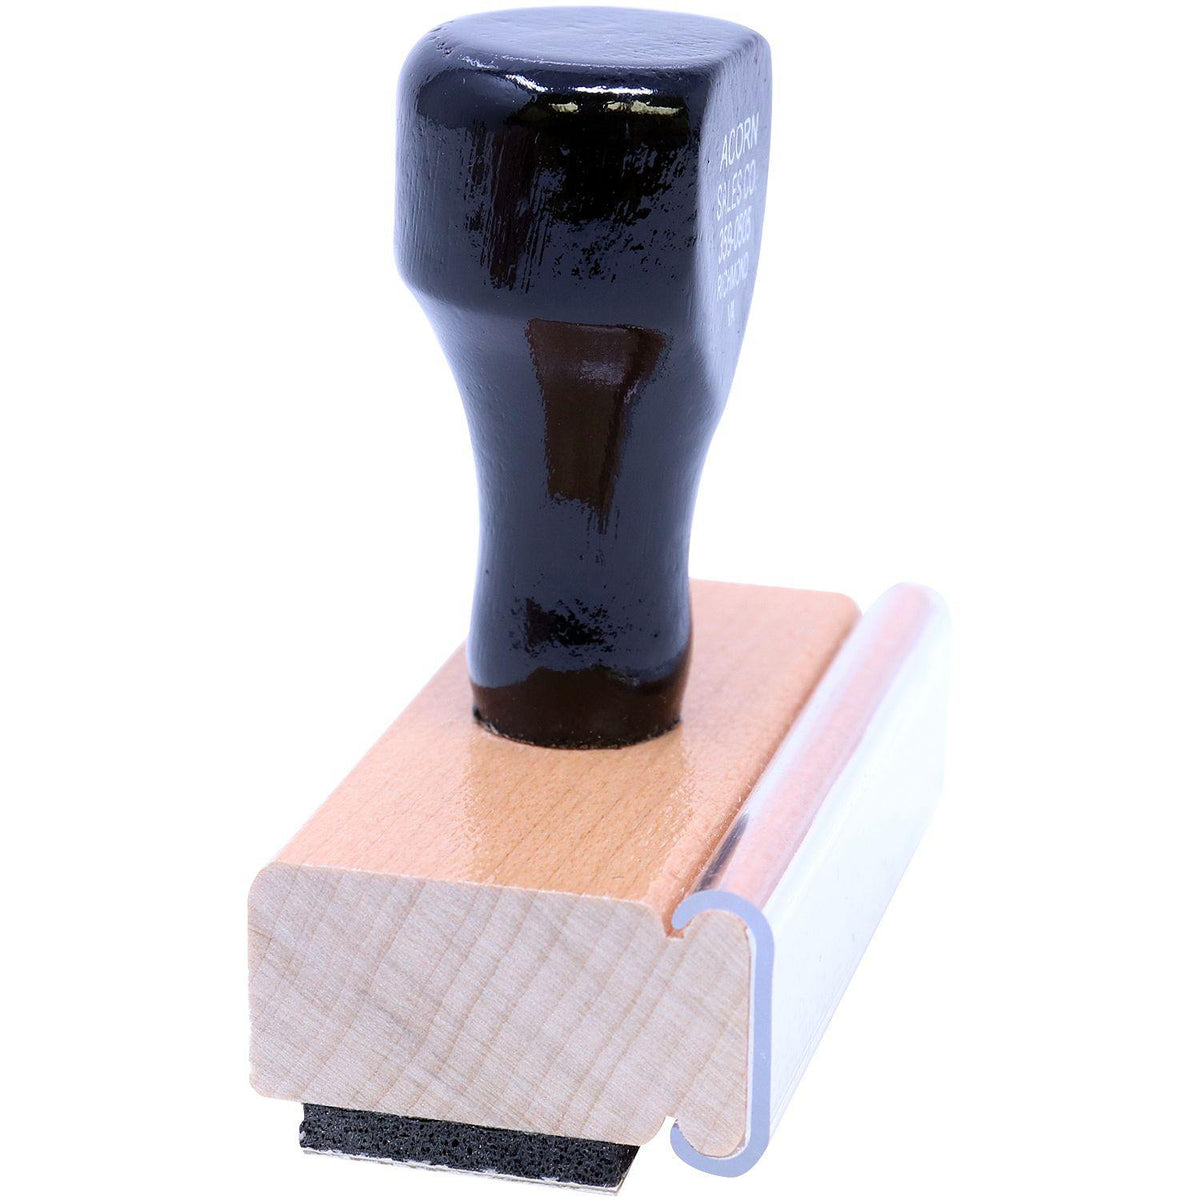 Side View of Archivado Rubber Stamp at an Angle